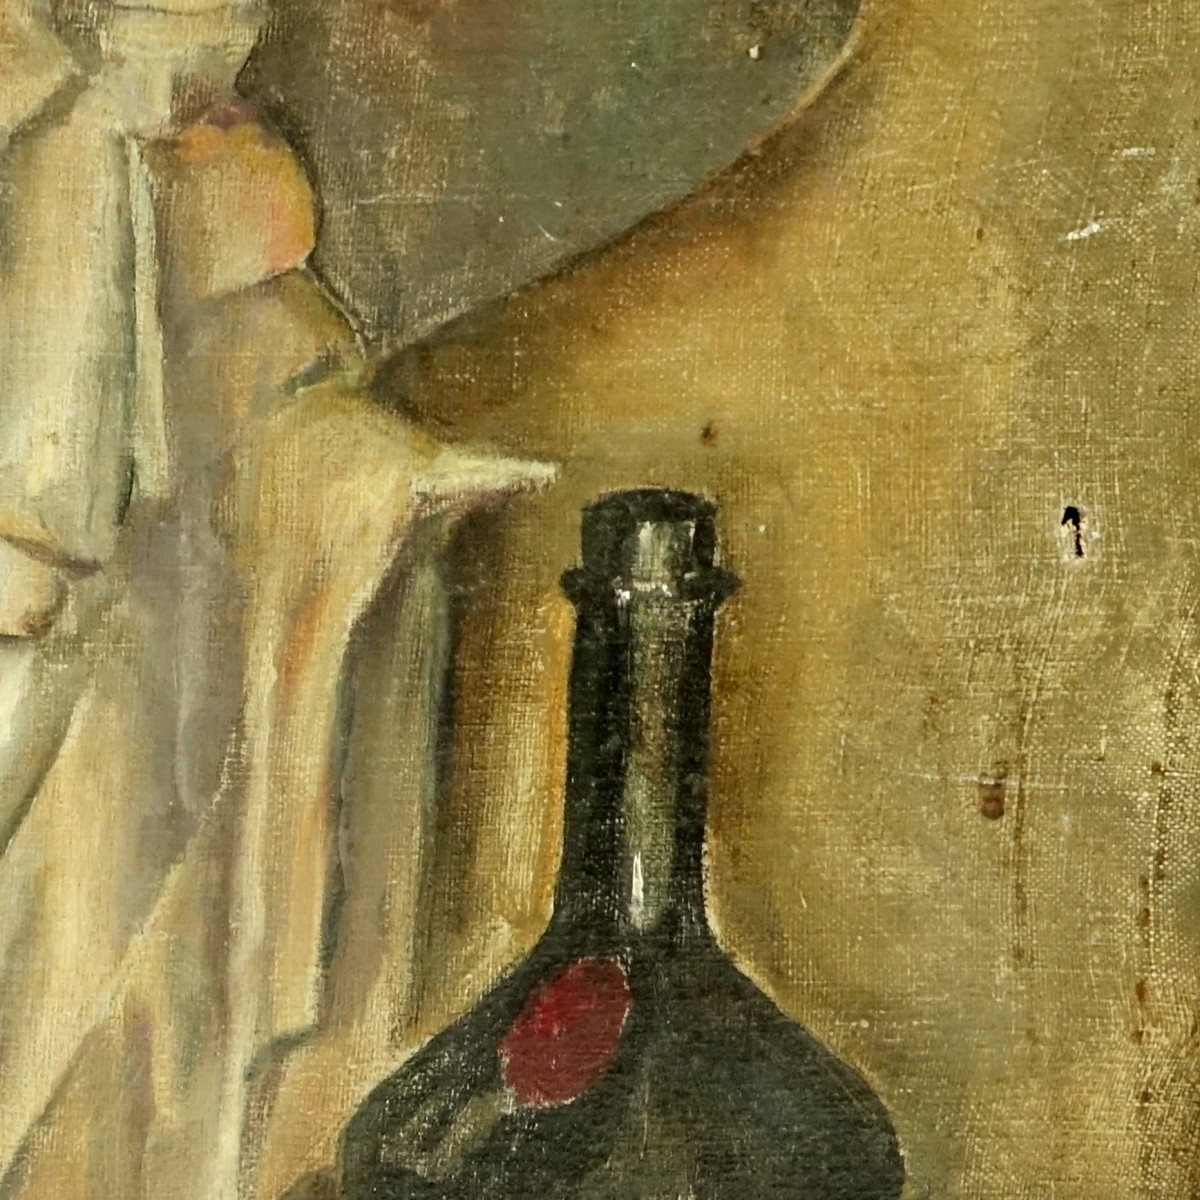 20C Oil on Canvas Anglican Still Life